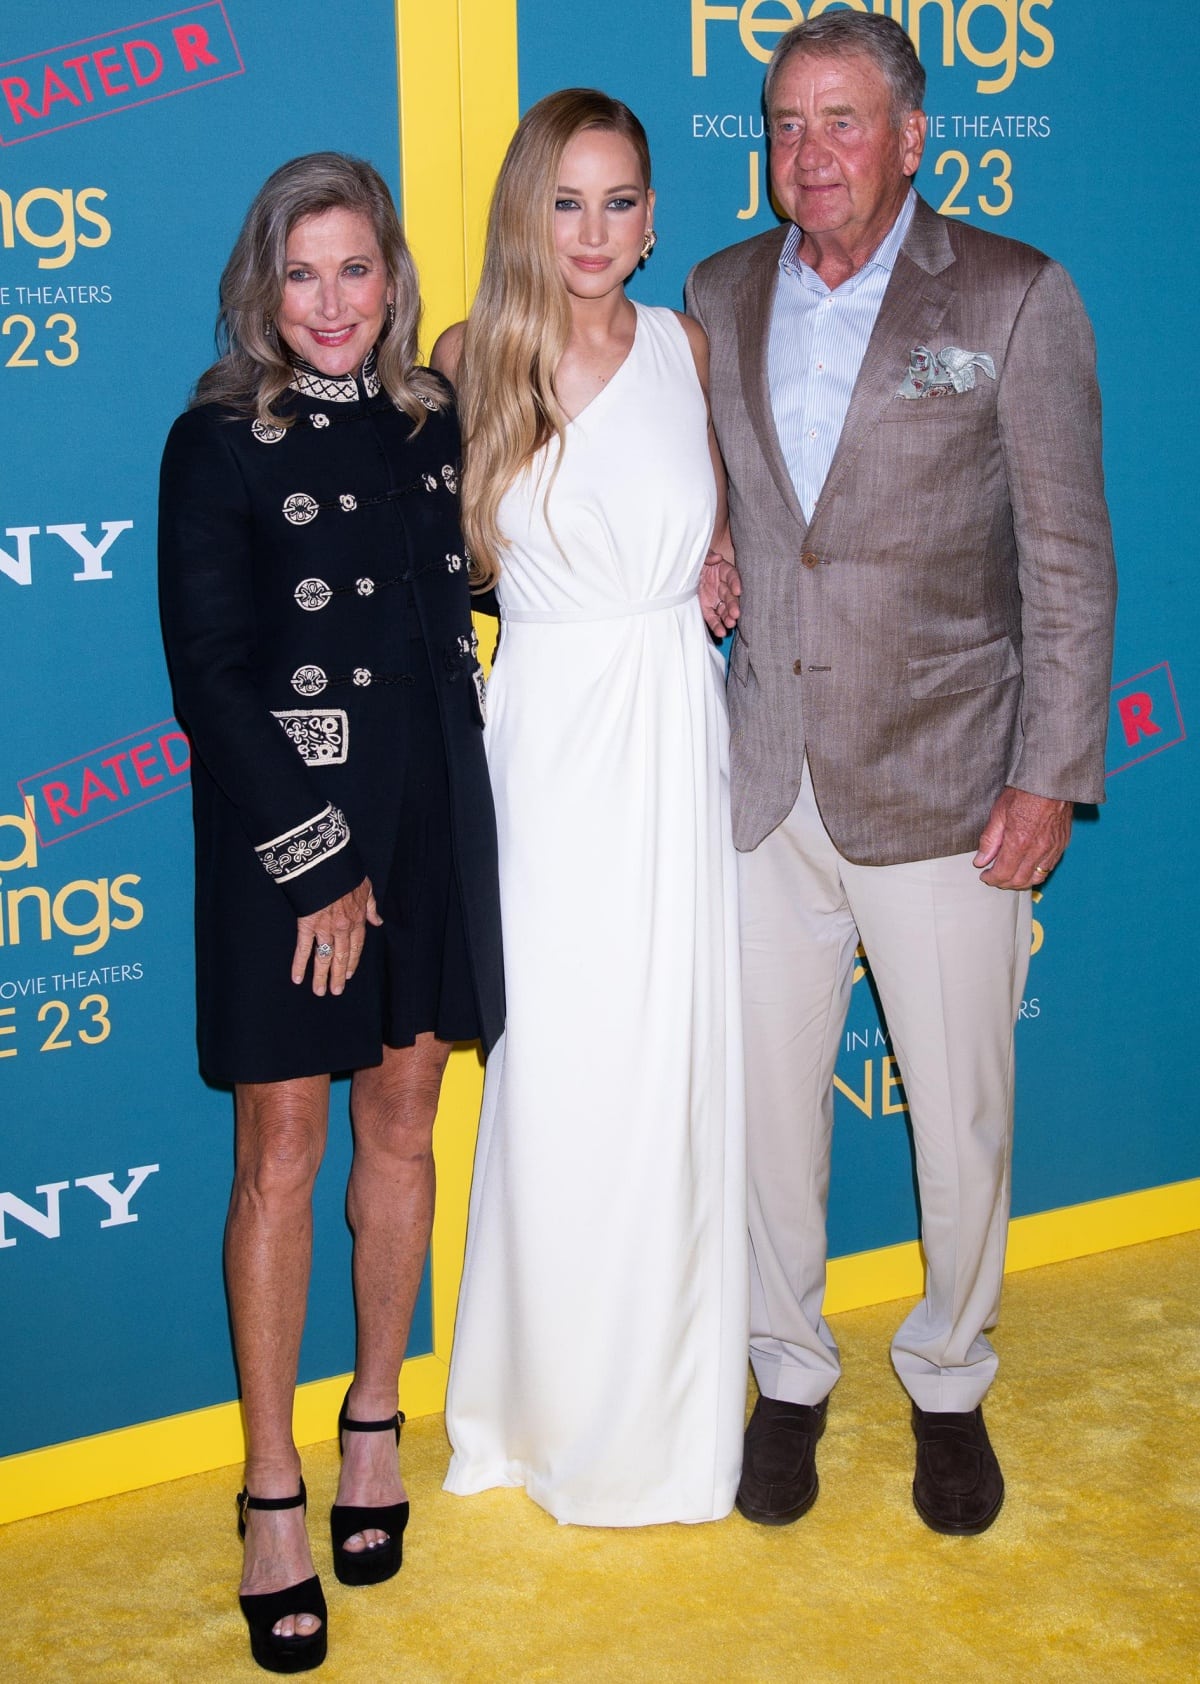 Jennifer Lawrence’s parents, Karen and Gary Lawrence, showed their support at the New York premiere of No Hard Feelings